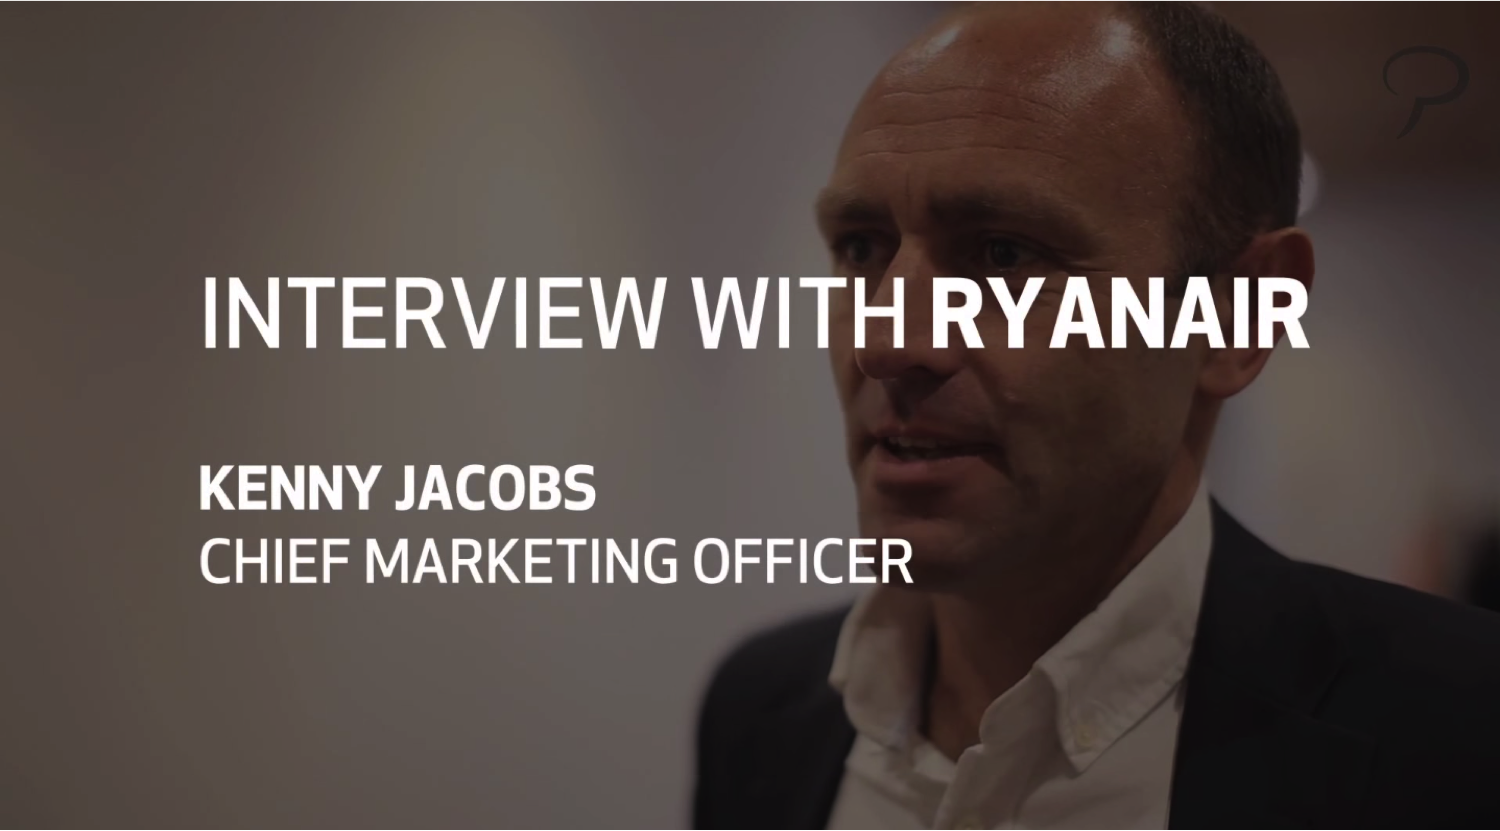 Interview with Ryanair's Chief Marketing Officer, Kenny Jacobs